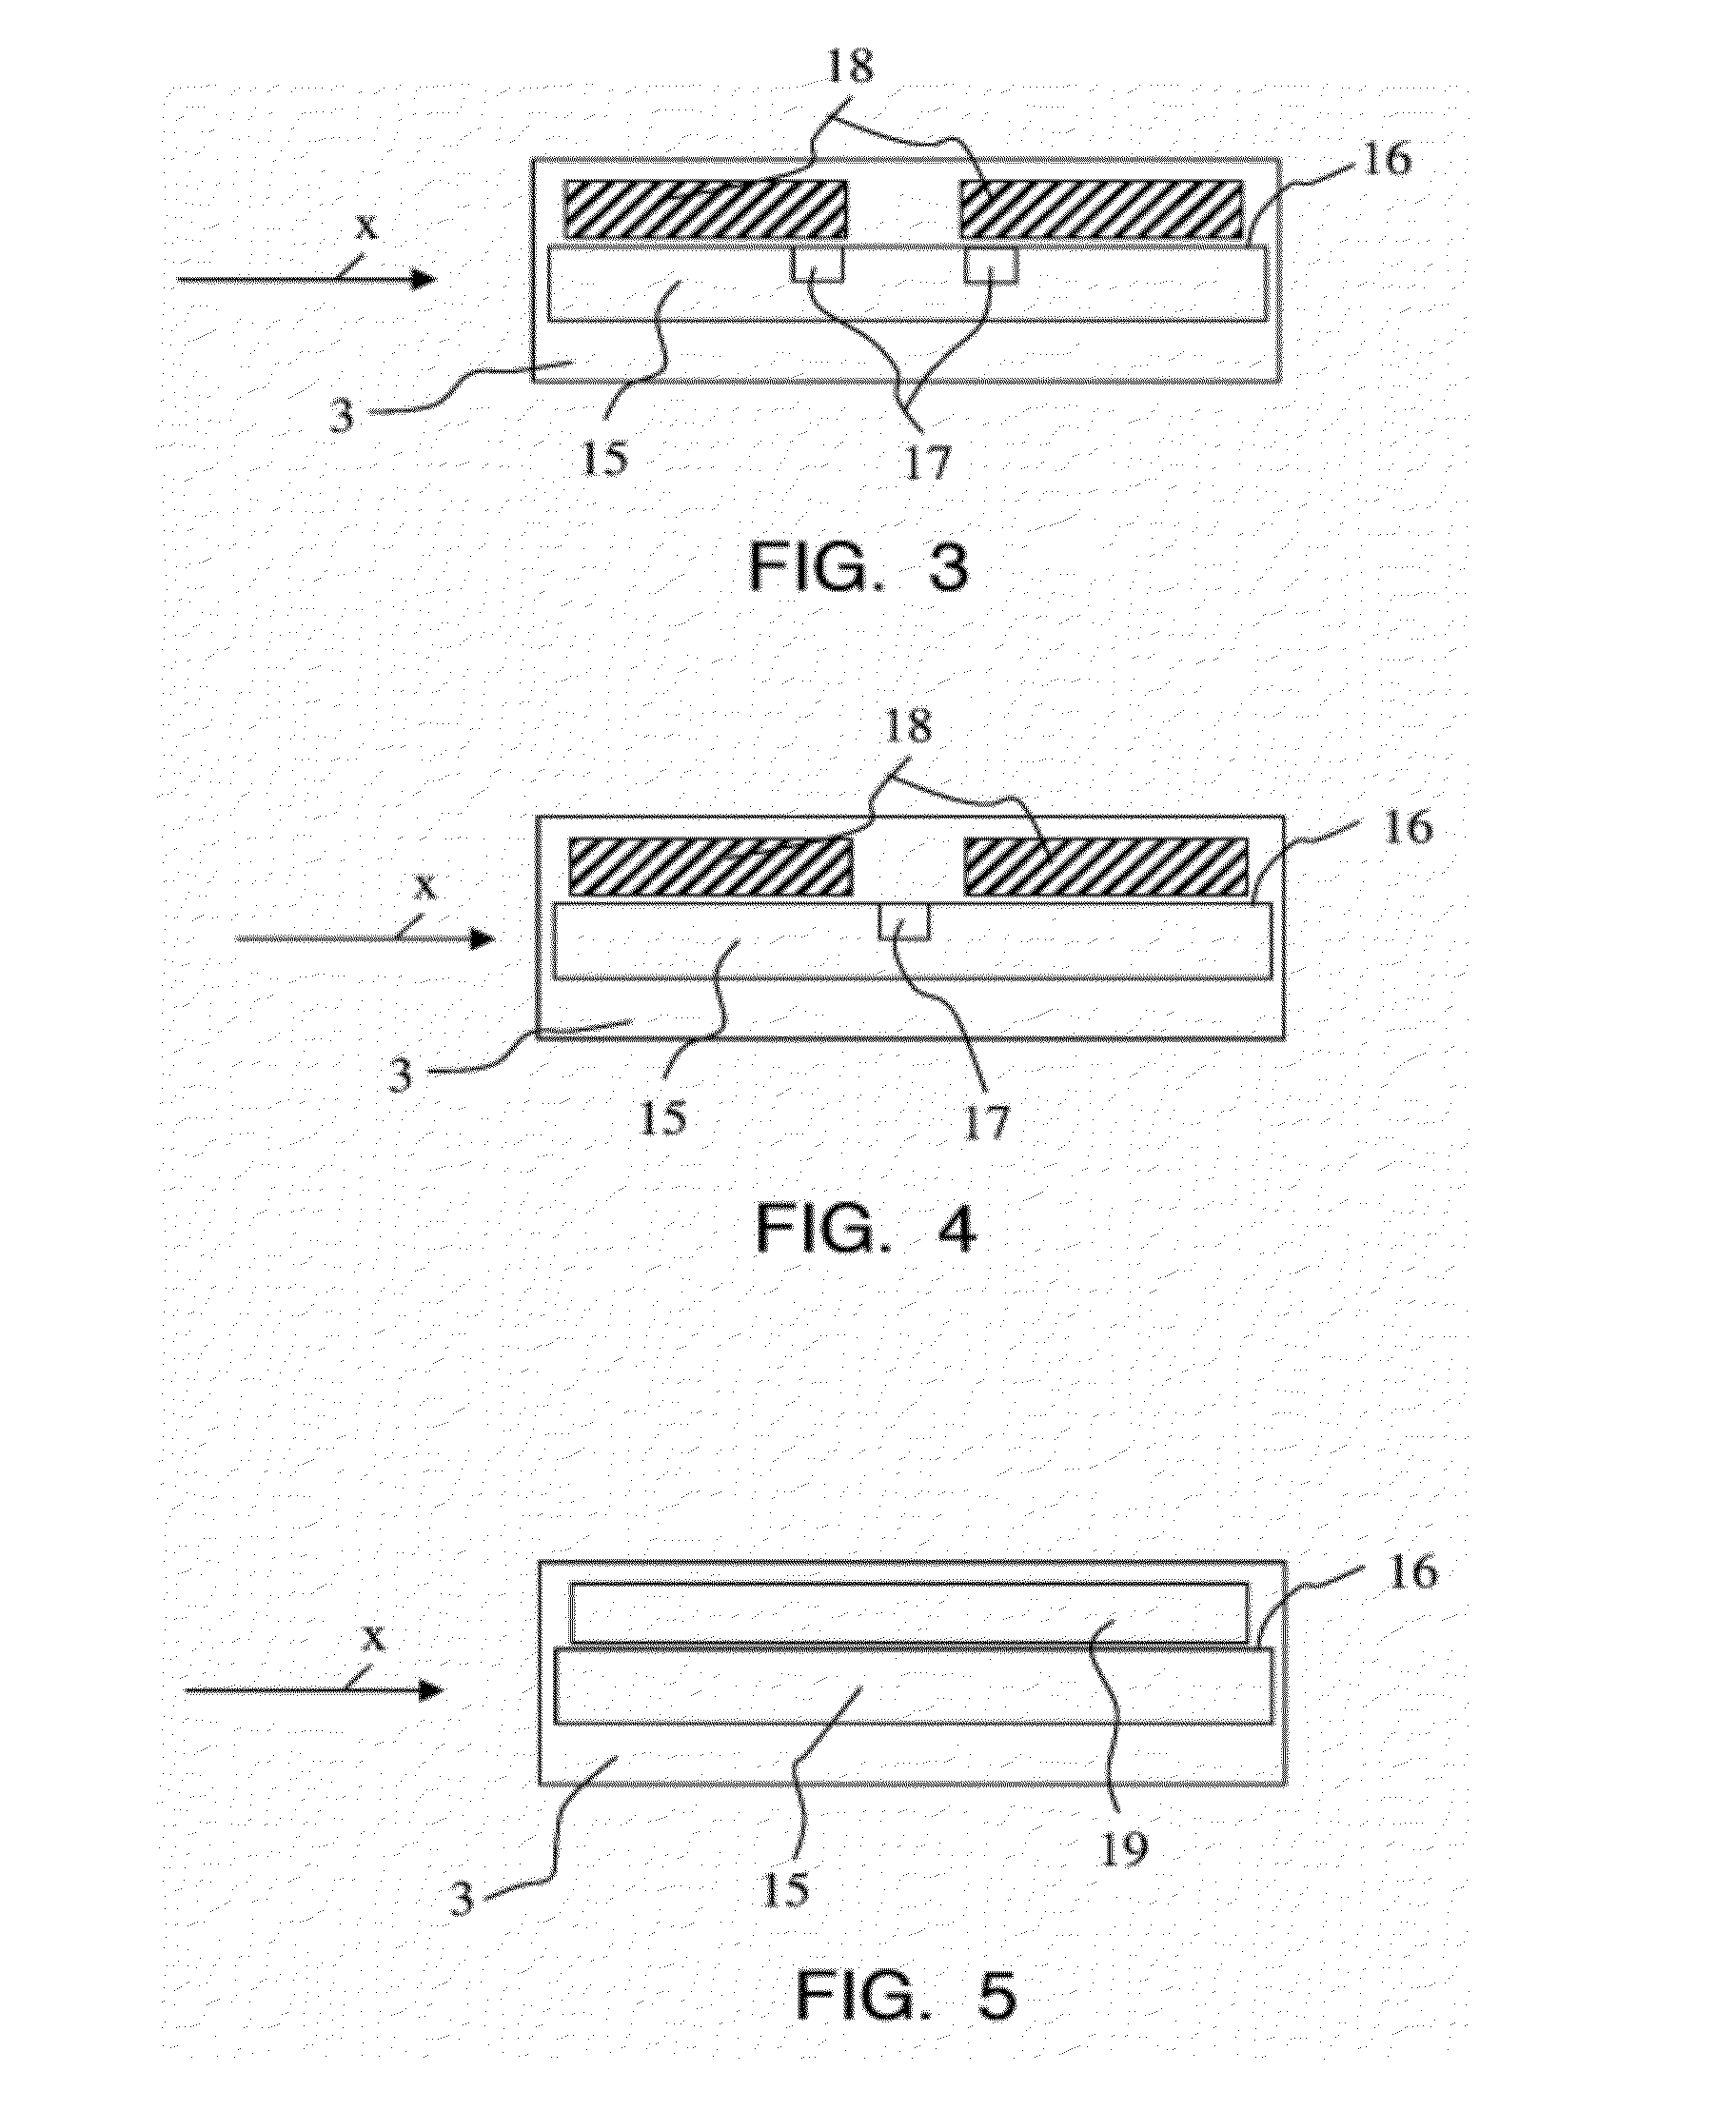 Device for measuring a current flowing through an electric cable